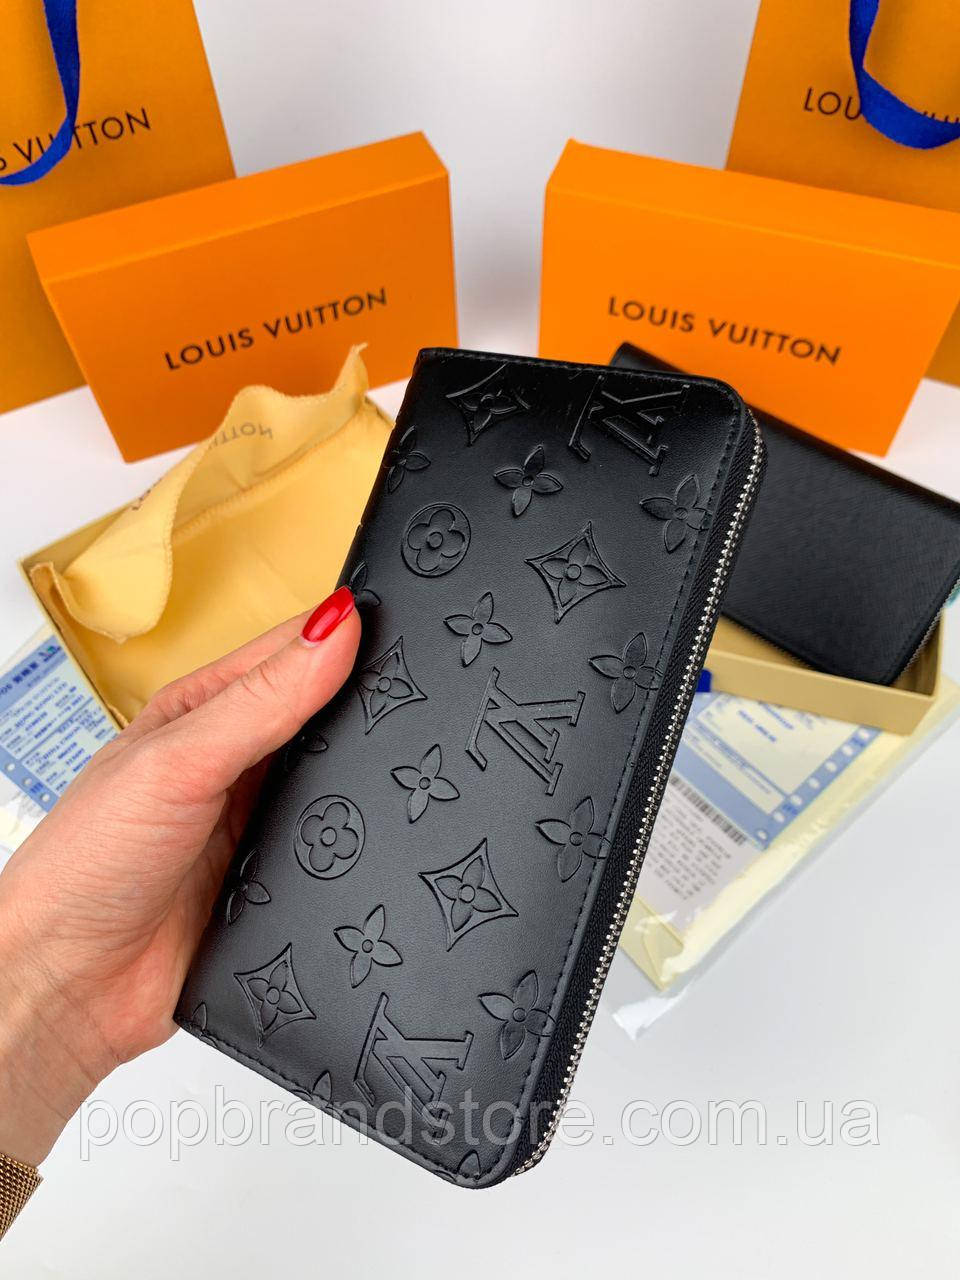 Leilani's closet - New model 💙 * LOUIS VUITTON ♢ ️🔷 ♢ ️ .. Shoe Price;-17,500  One pices Belt;-#3500 One pices Wallet (from cuzdan)#3500  Size;-40/41/42/43/44/45 Turkey brand ( pre order ..7 days )